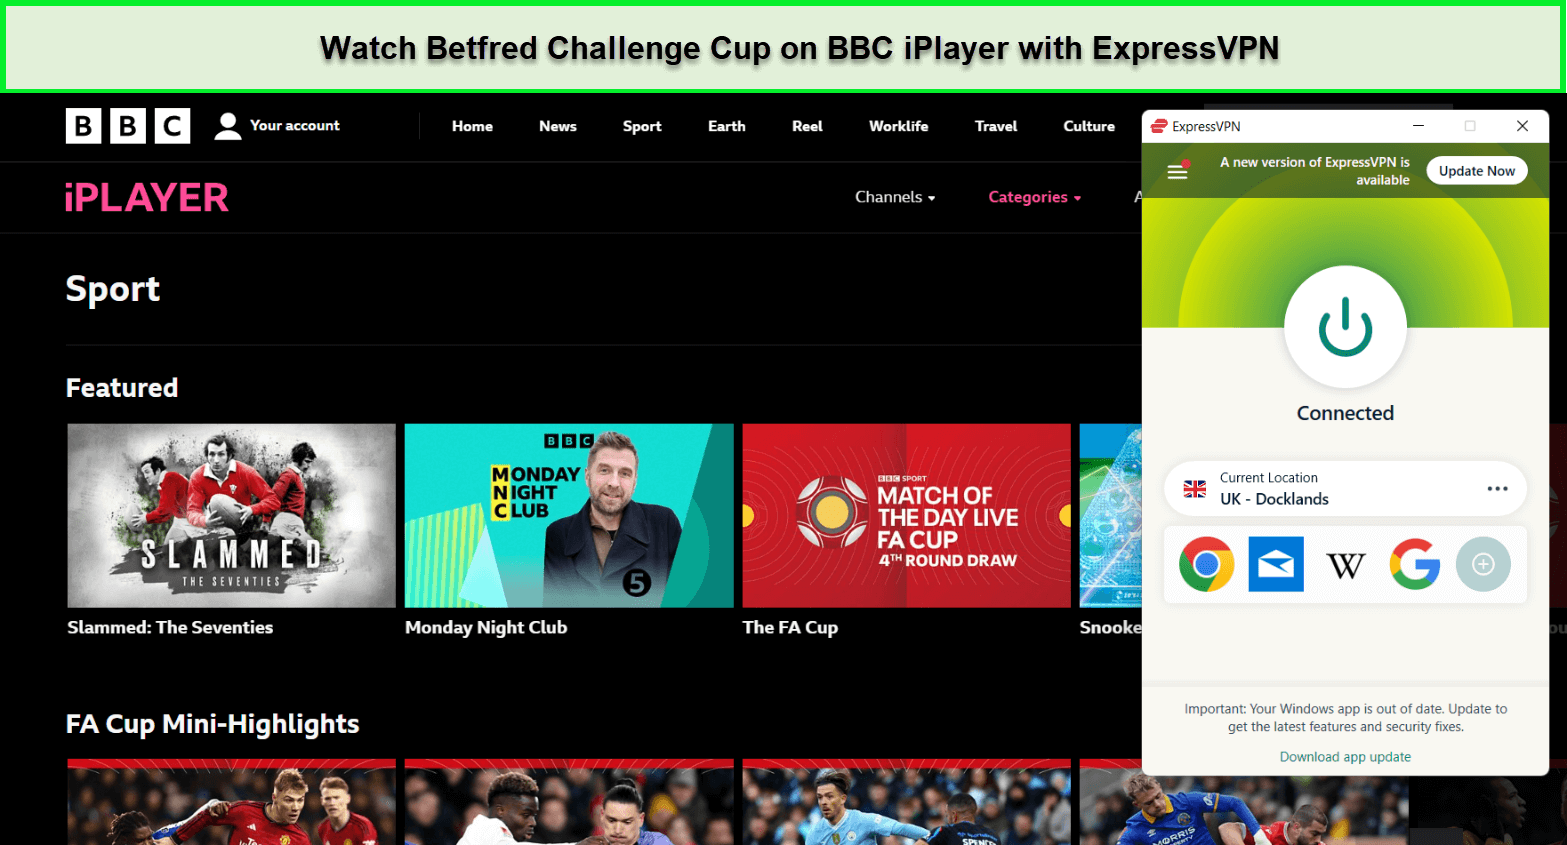 Watch-Betfred-Challenge-Cup-outside-UK-on-BBC-iPlayer-via-ExpressVPN